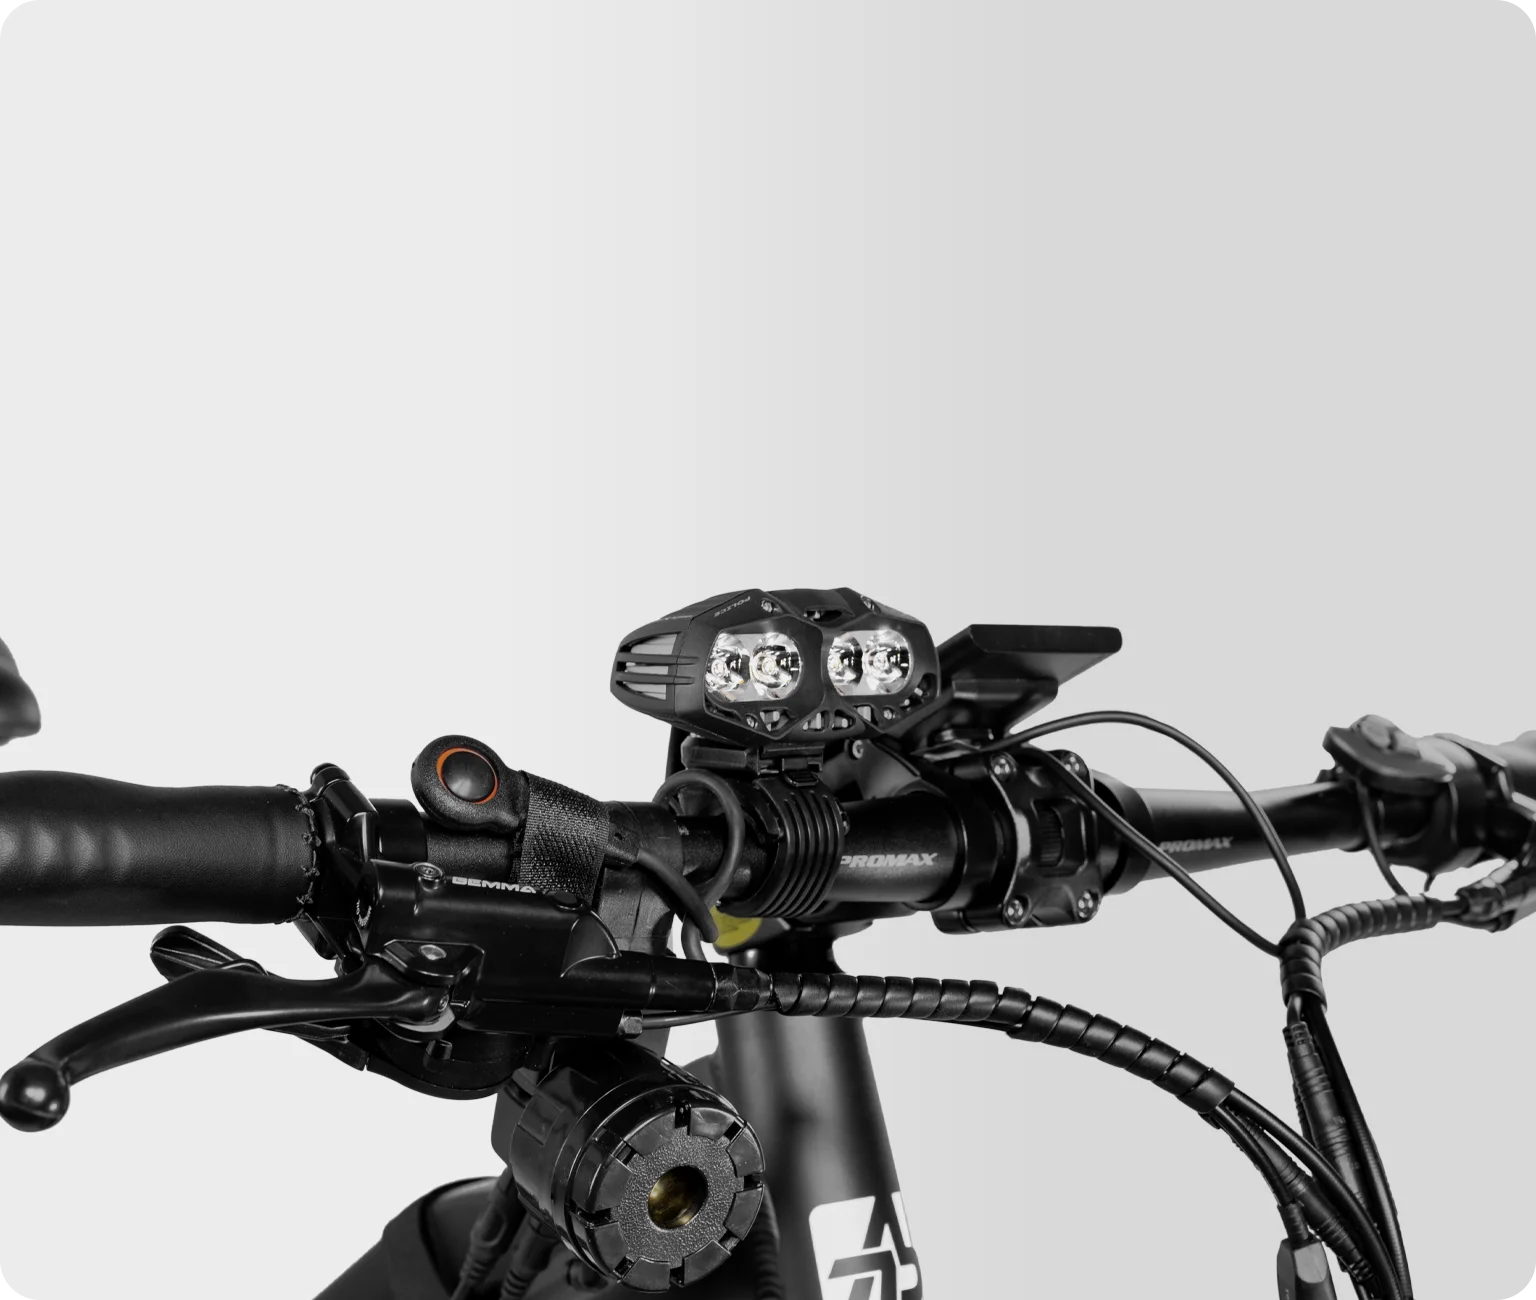 A side view of the 1000w motor on the ATR 528 Police eBike